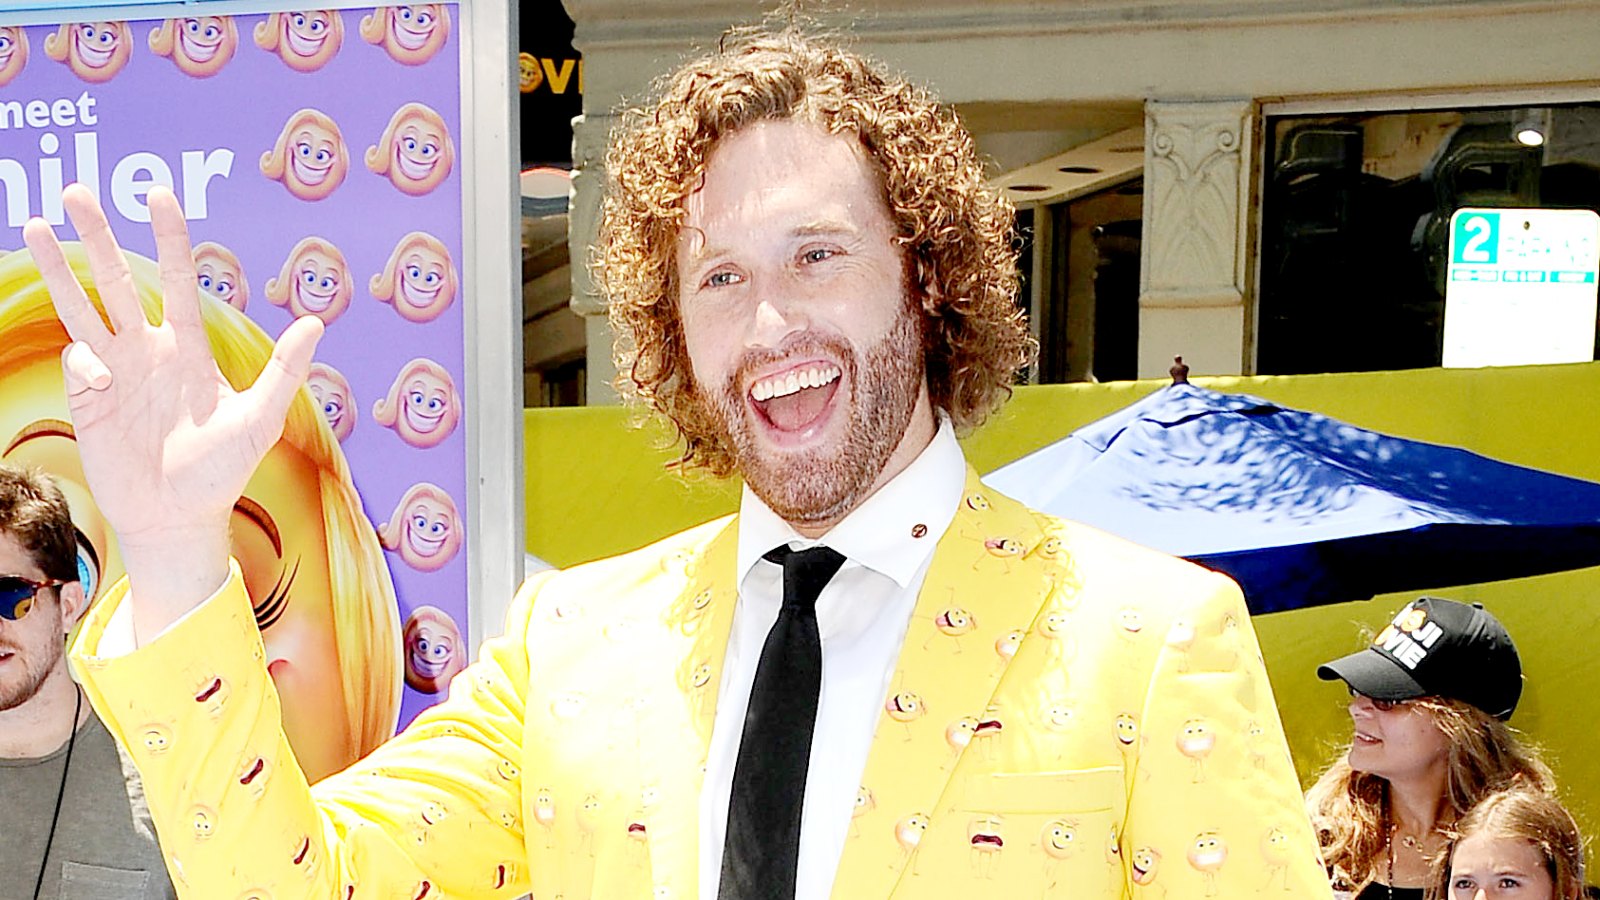 T.J. Miller attends the premiere of "The Emoji Movie" at Regency Village Theatre on July 23, 2017 in Westwood, California.